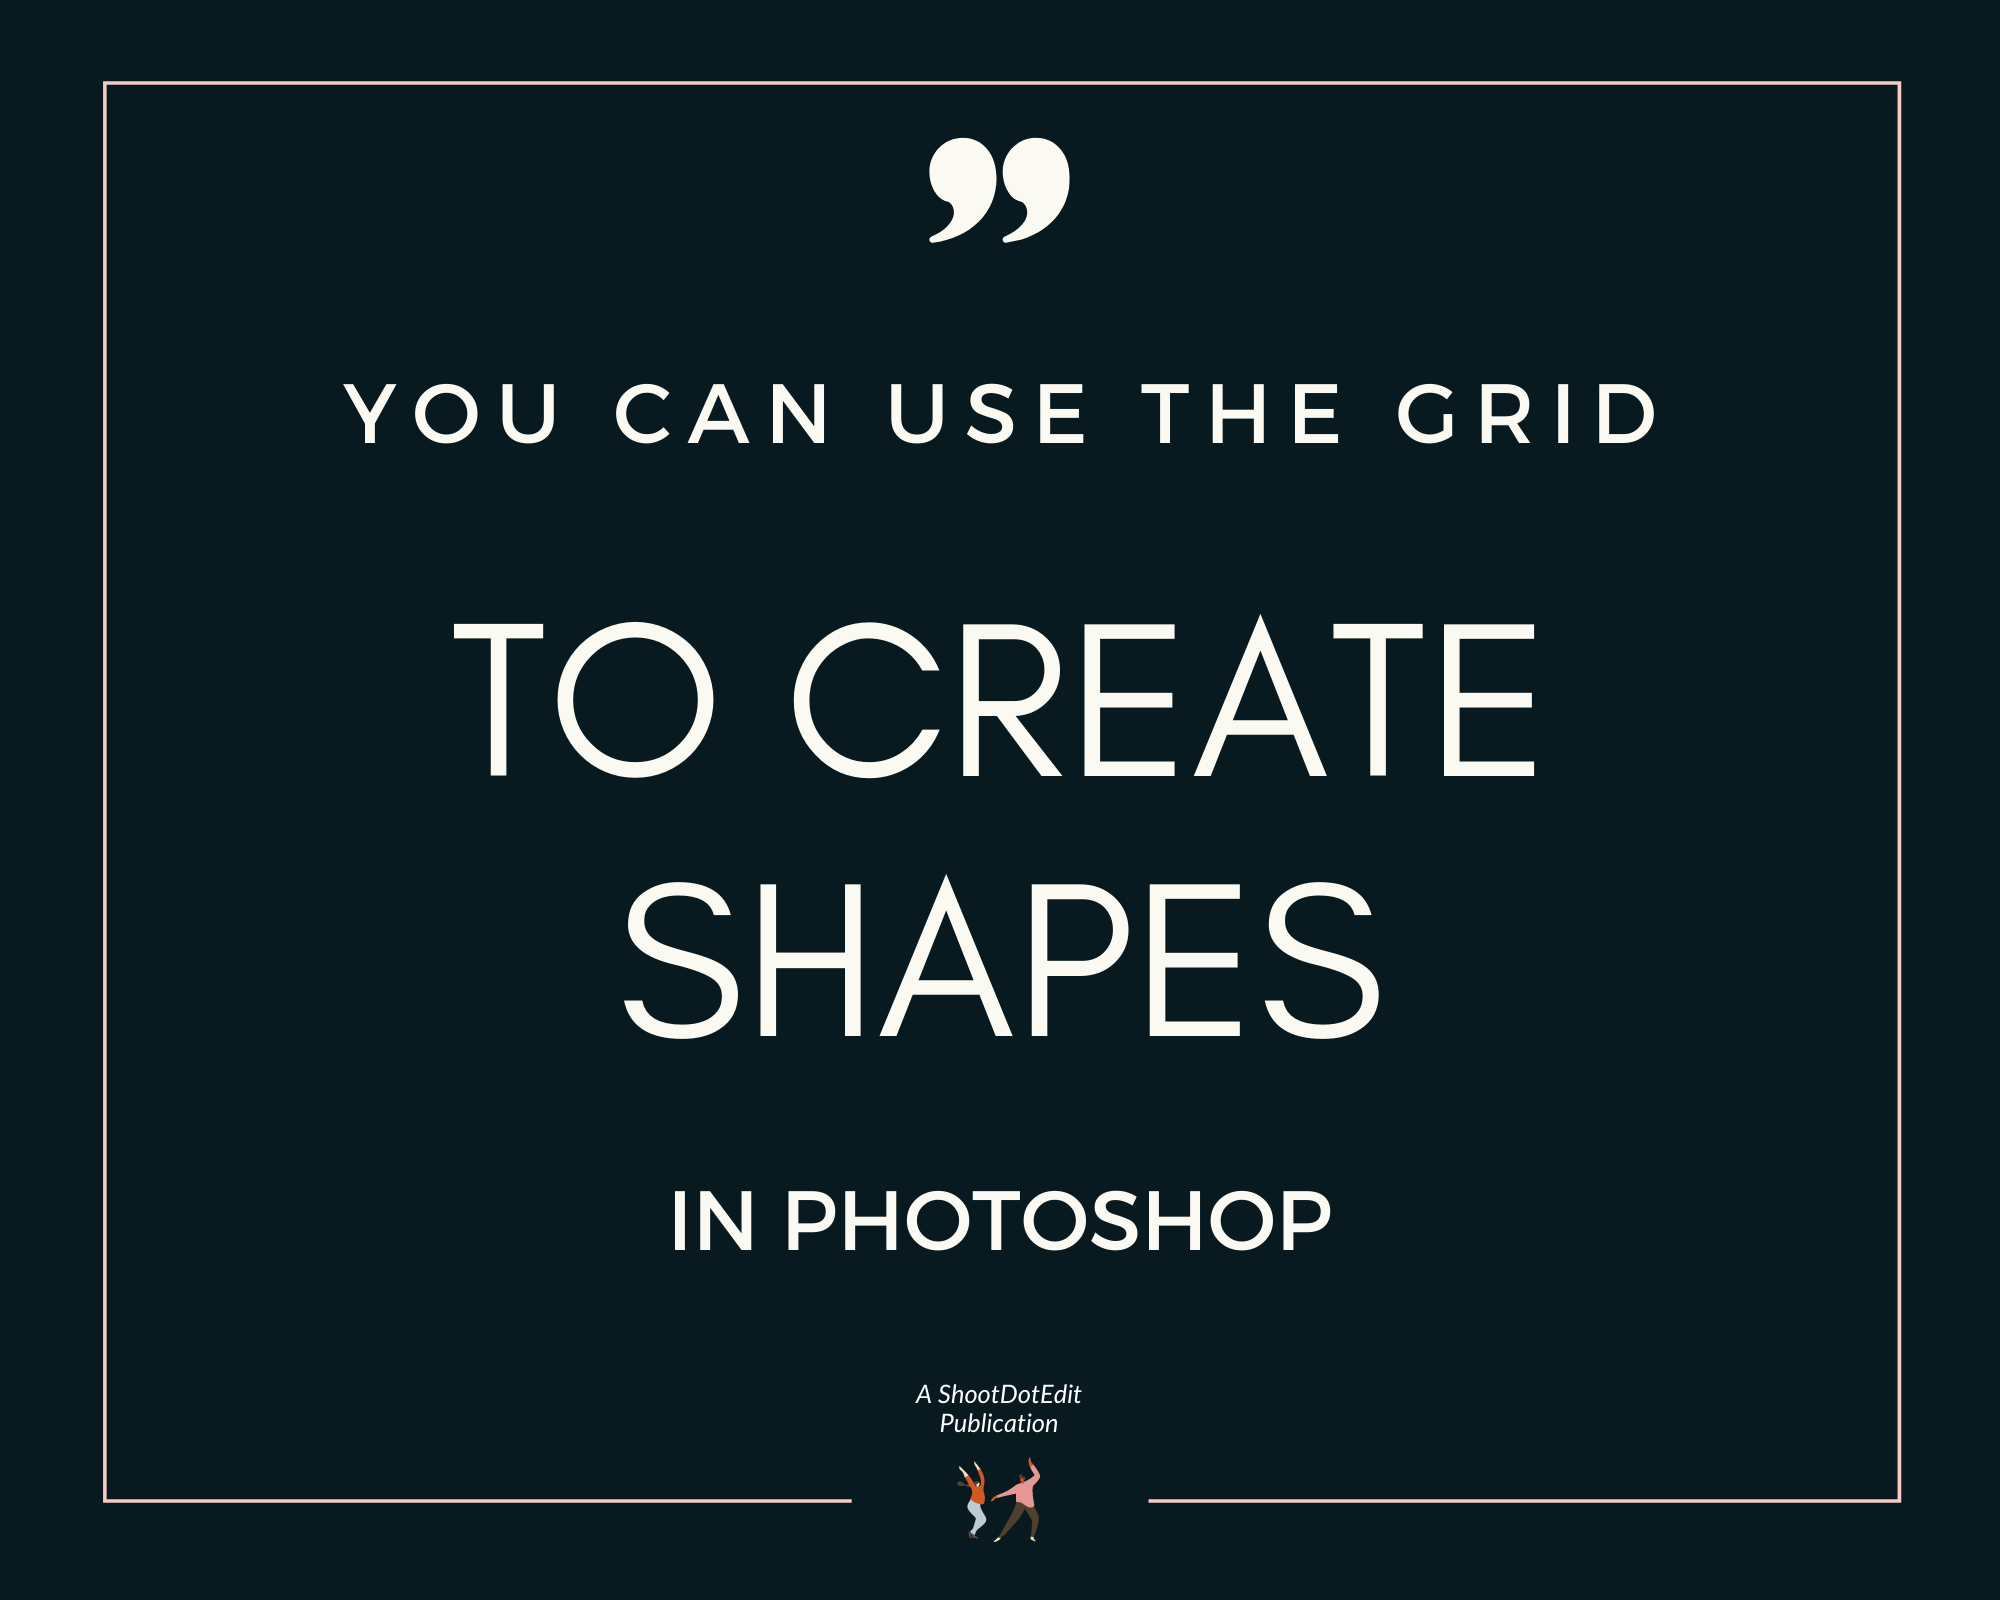 Infographic stating you can use the grid to create shapes